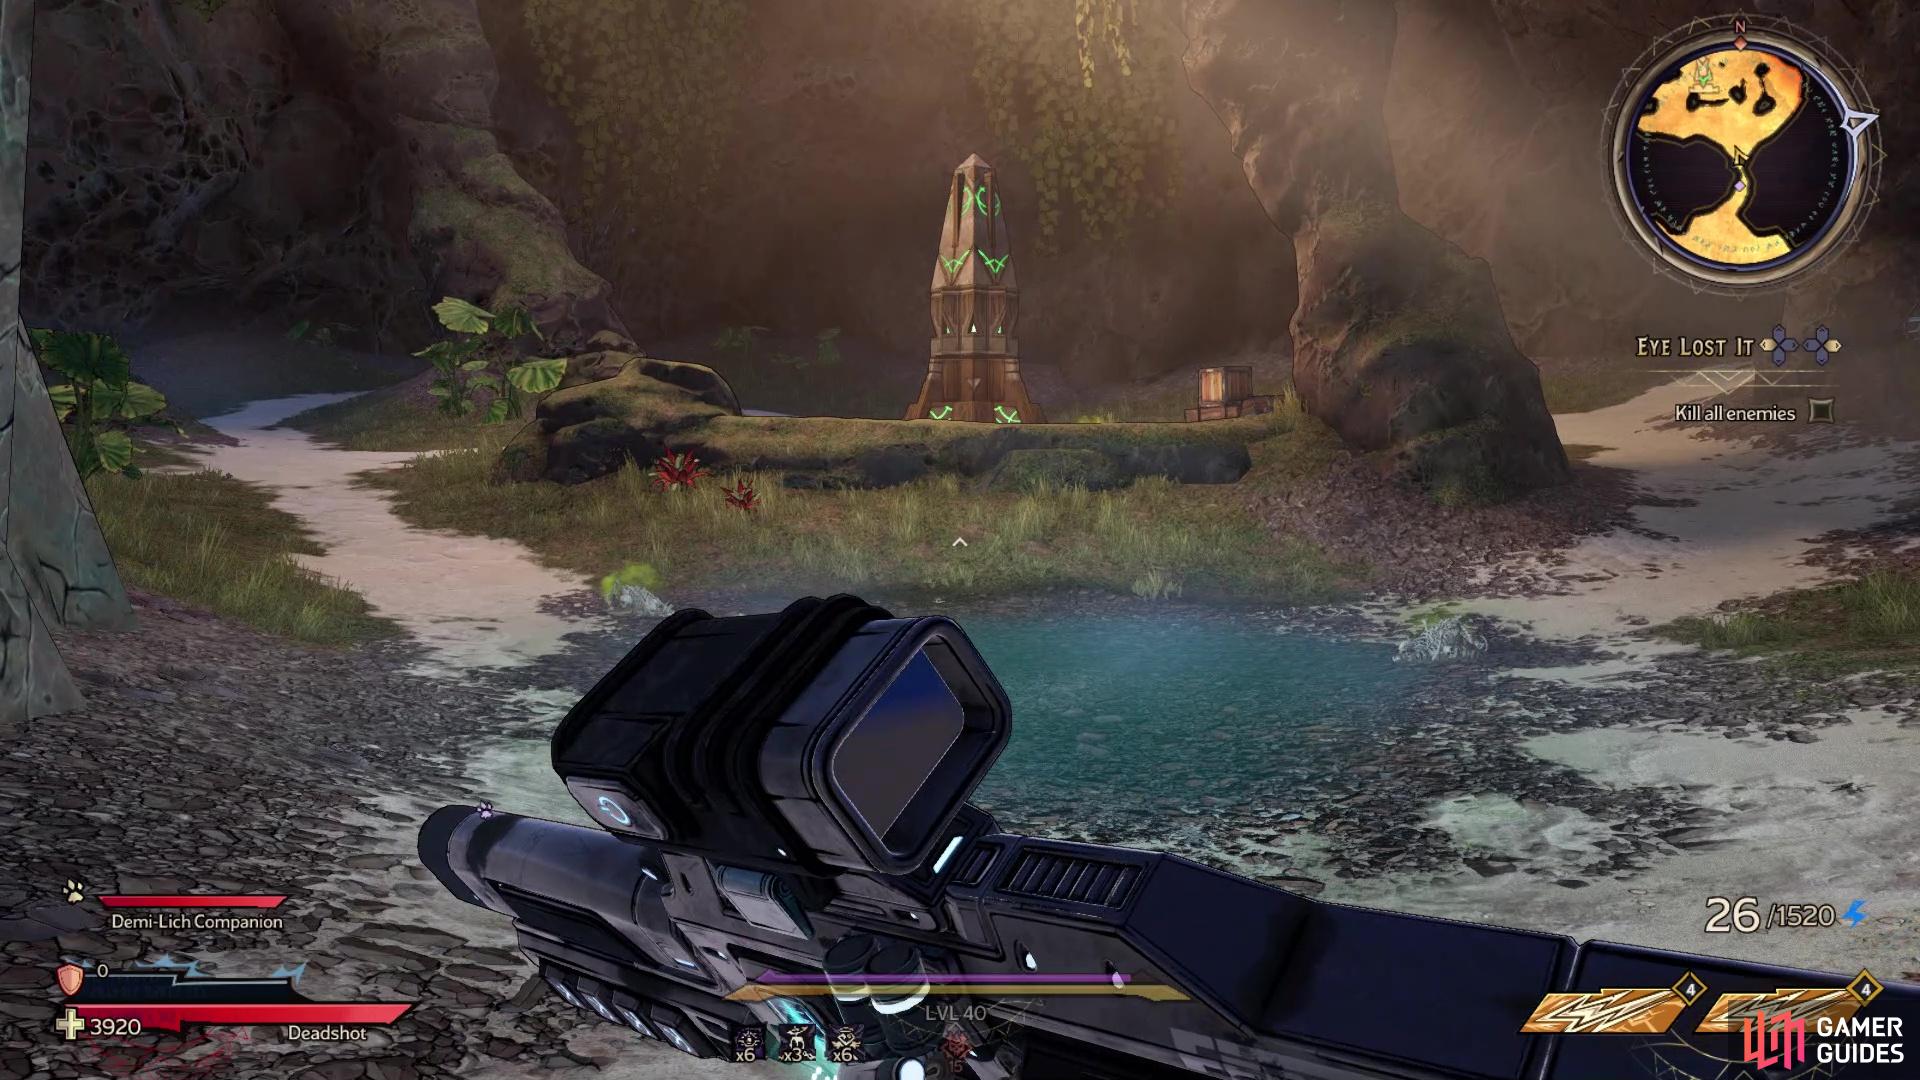 The Obelisk will be in the hidden area behind the waterfall